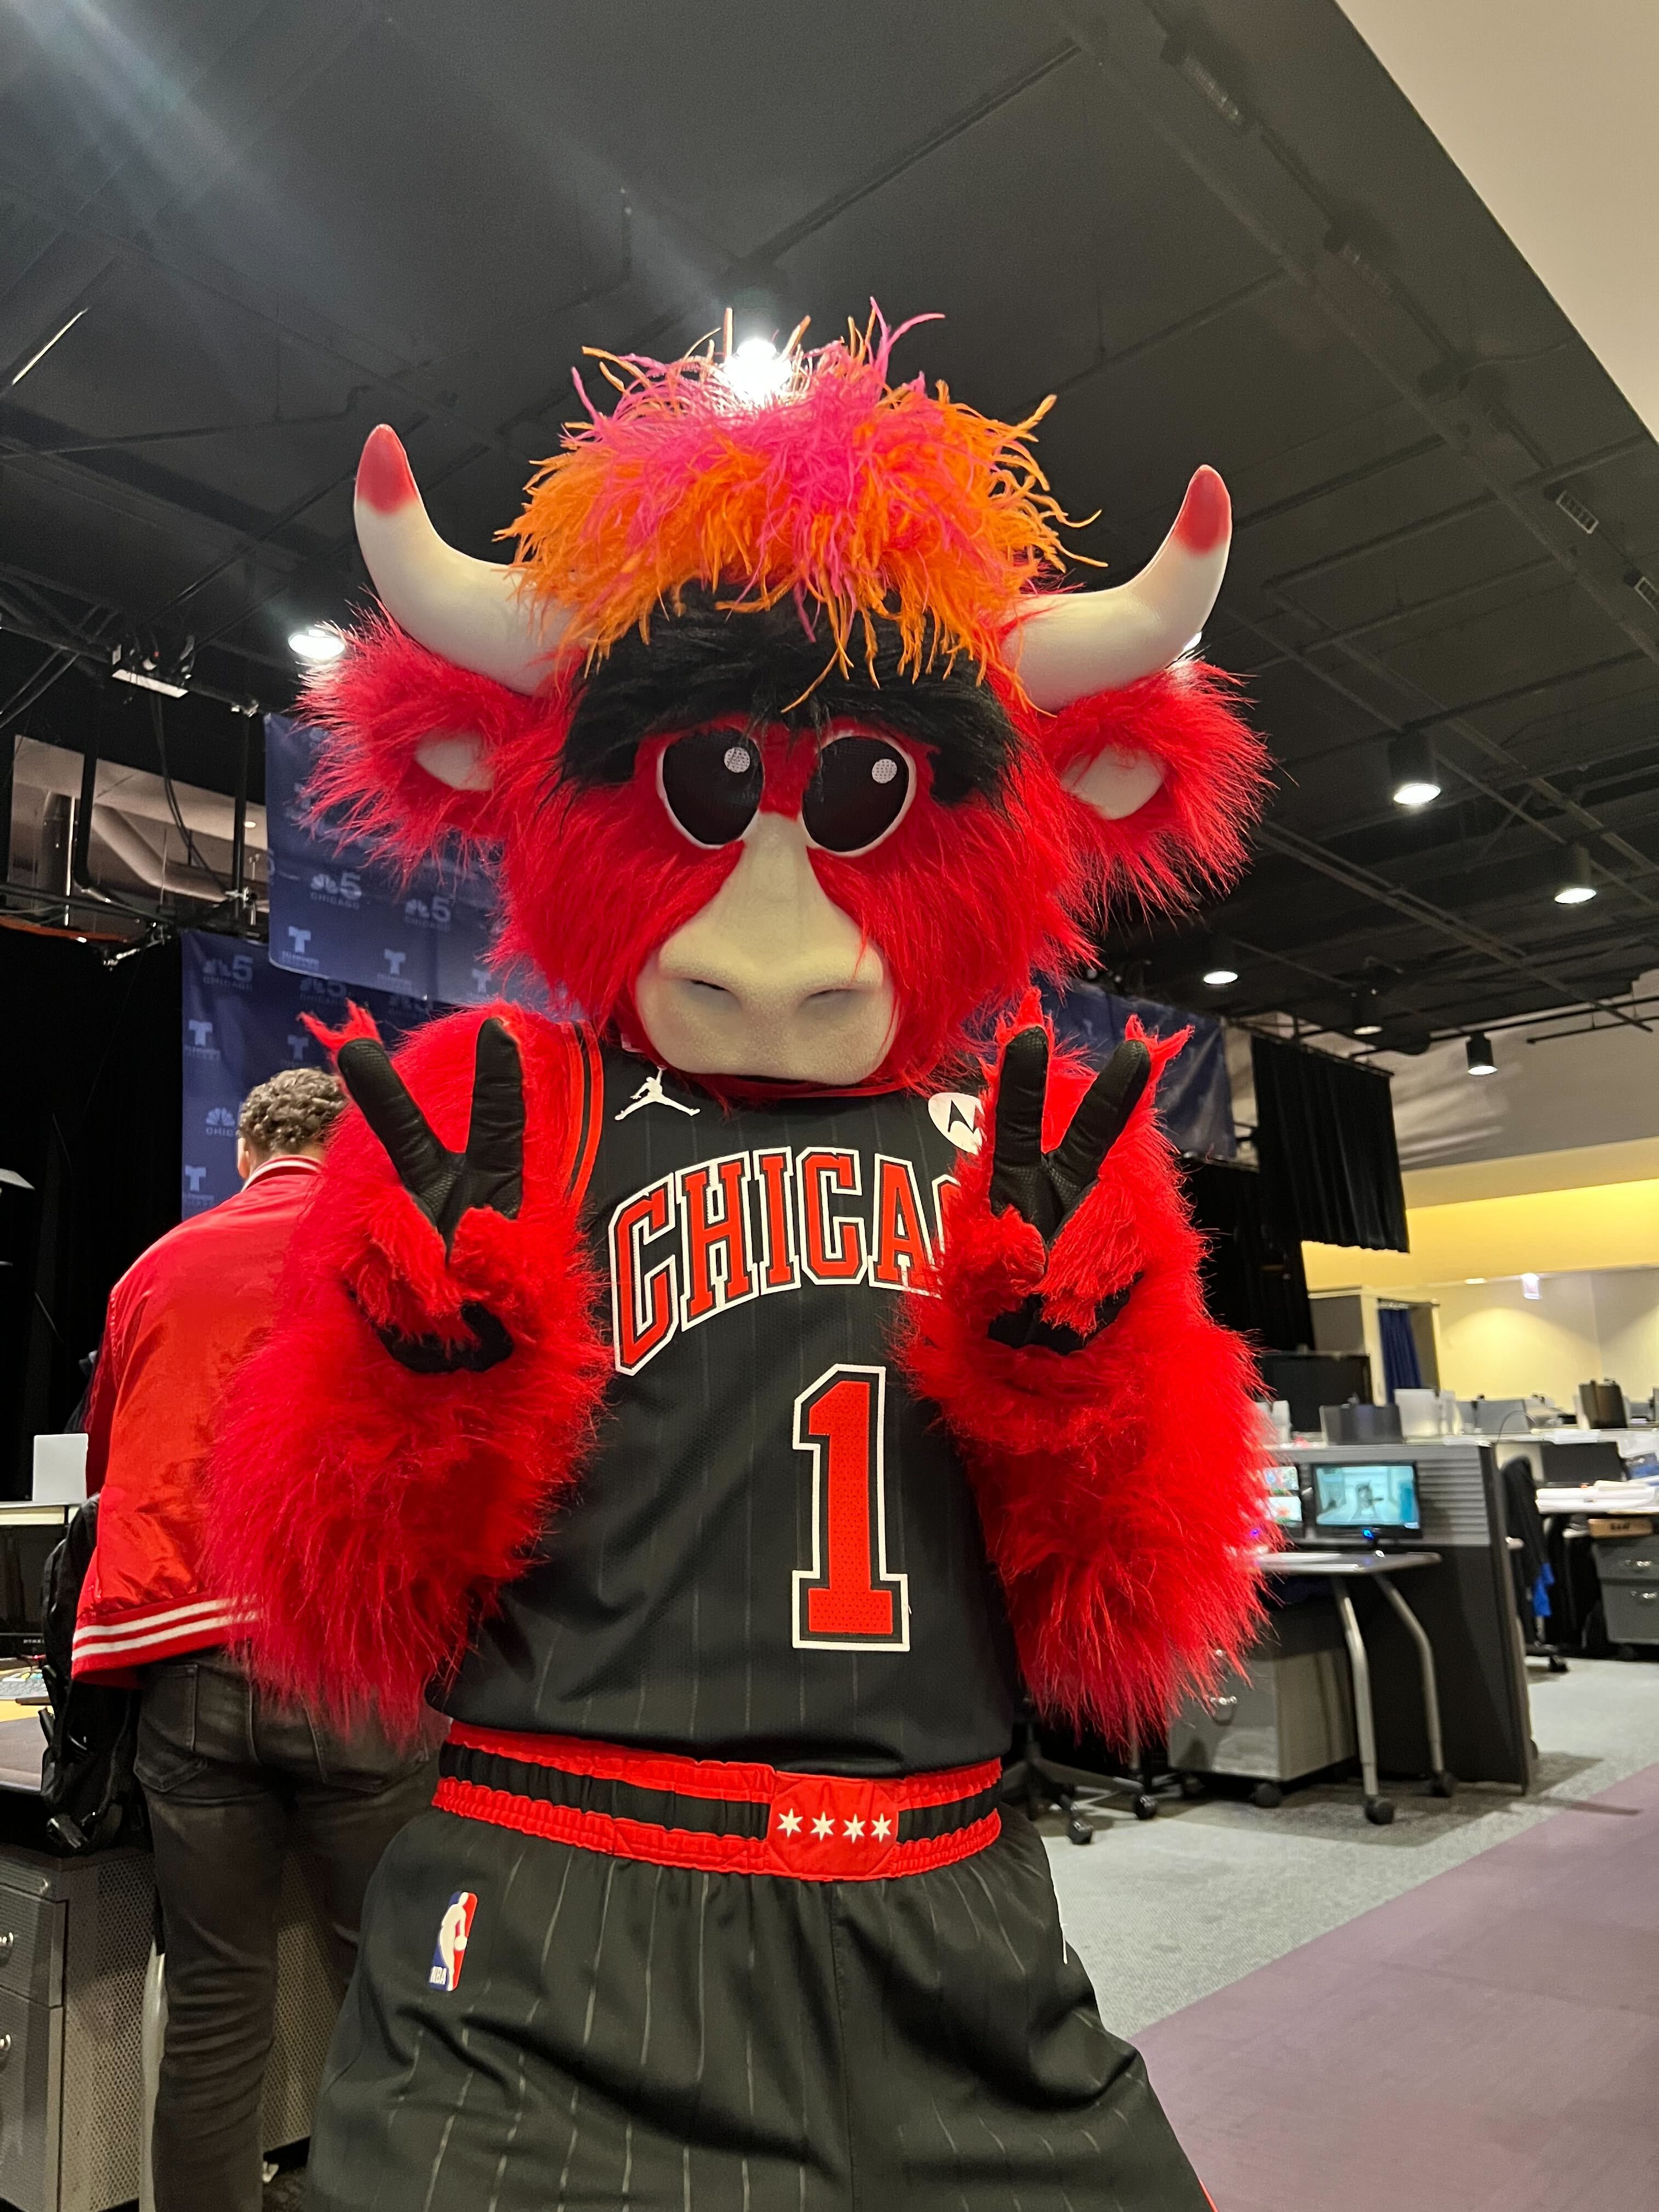 I asked an AI to show me a picture of the Chicago bulls mascot if